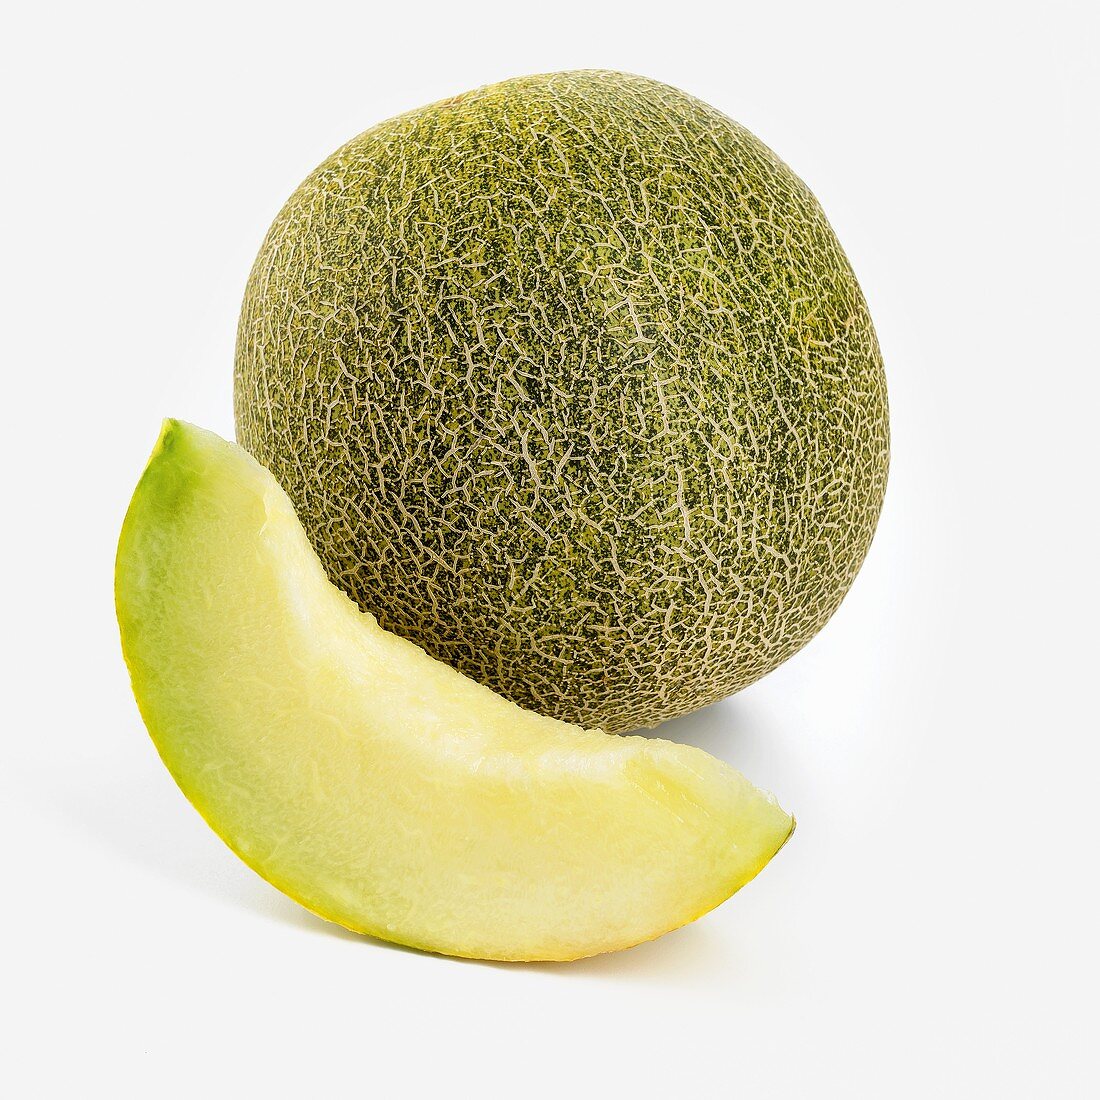 Whole Persian Melon with Slice